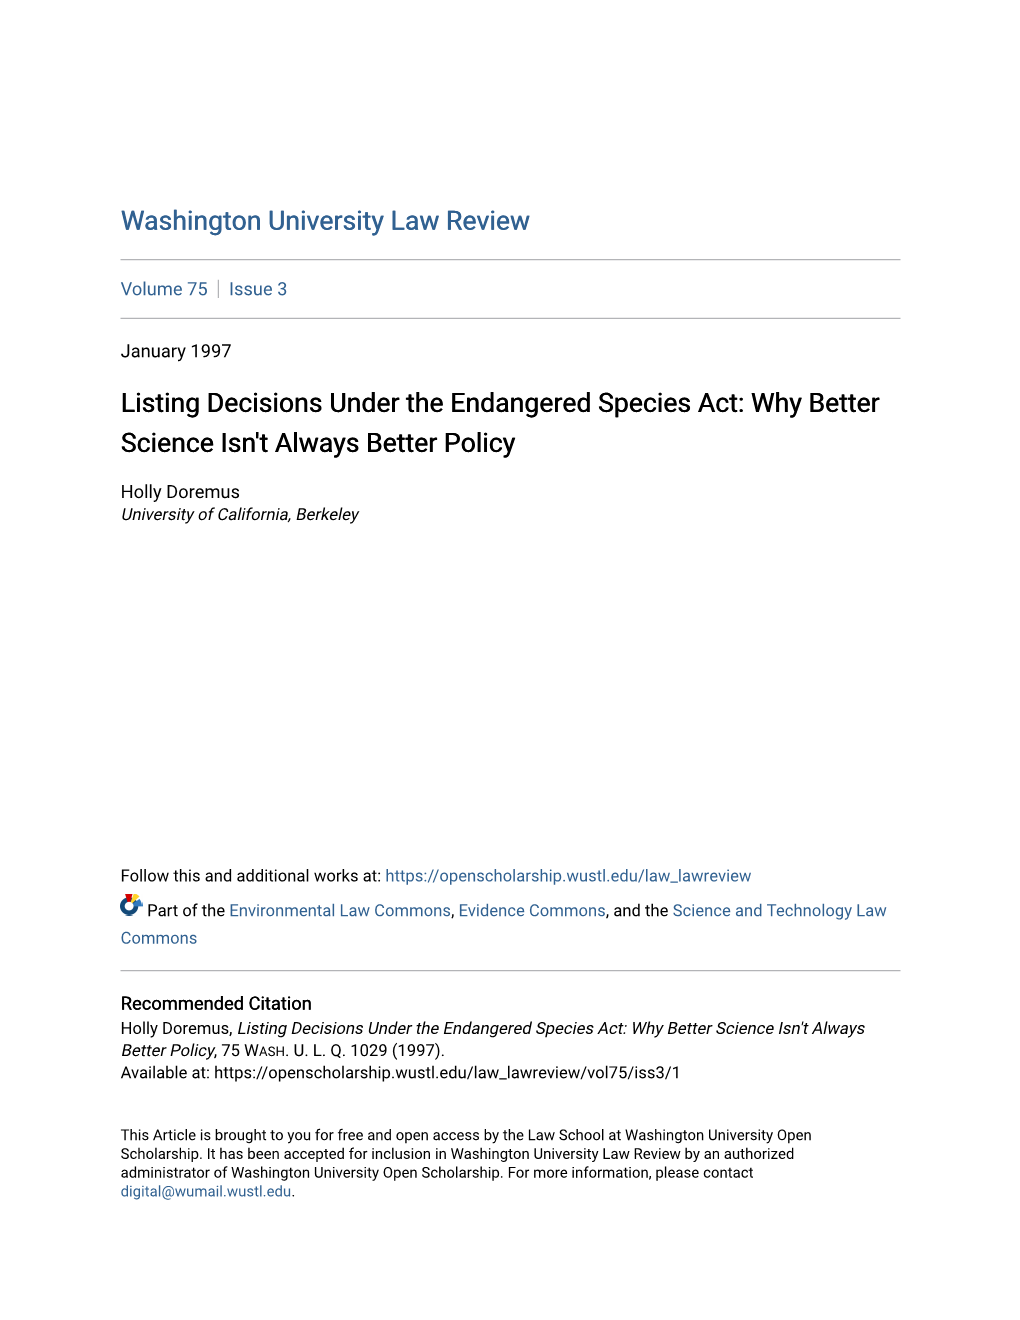 Listing Decisions Under the Endangered Species Act: Why Better Science Isn't Always Better Policy